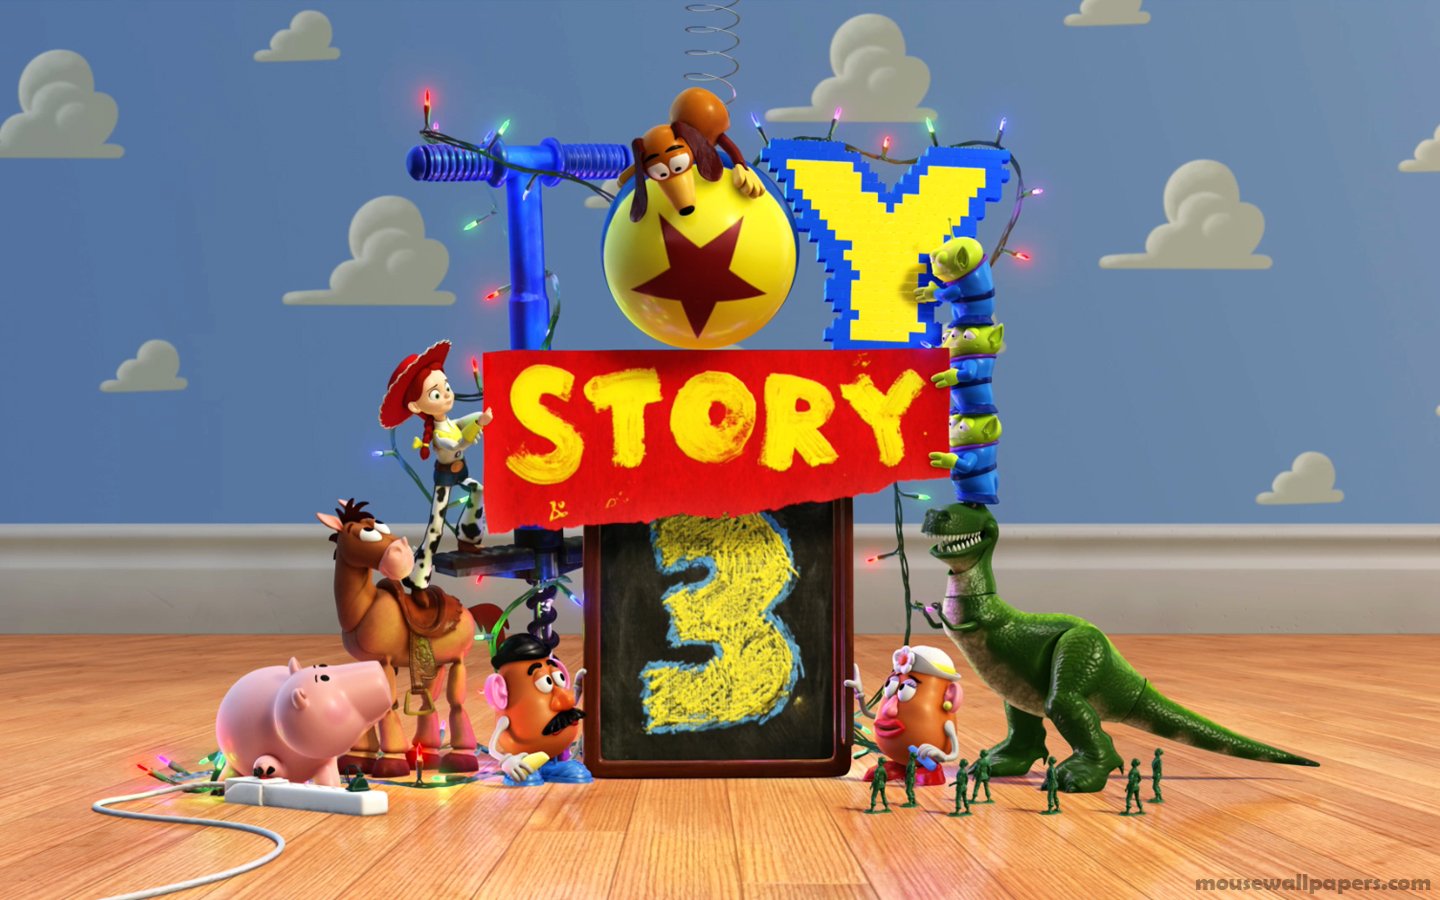 Toy Story 3 Awesome Wallpapers 1440x900